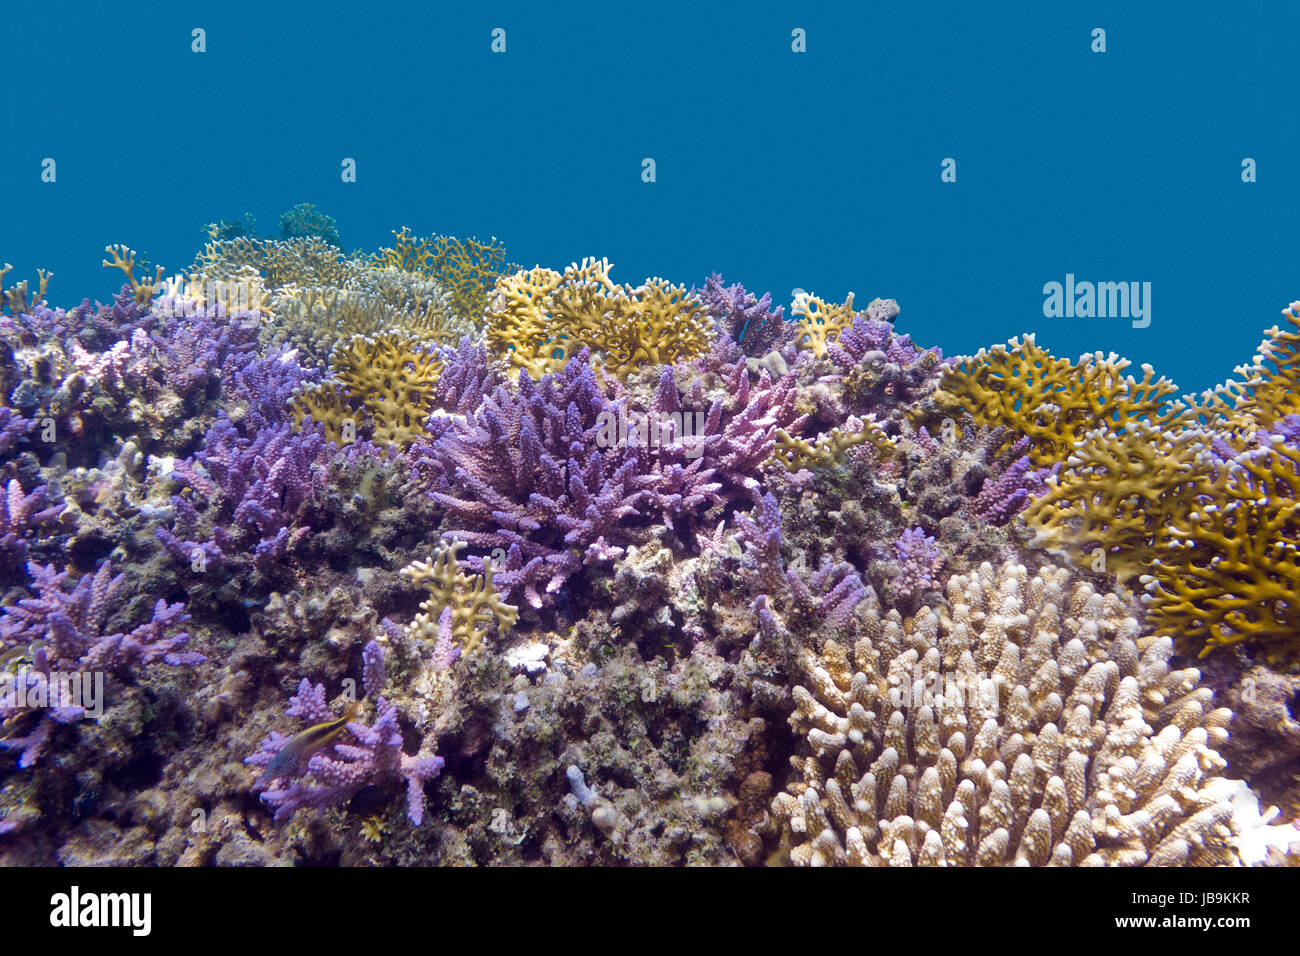 coral reel at the bottom of tropical sea with violet acropora corals on blue watter background Stock Photo